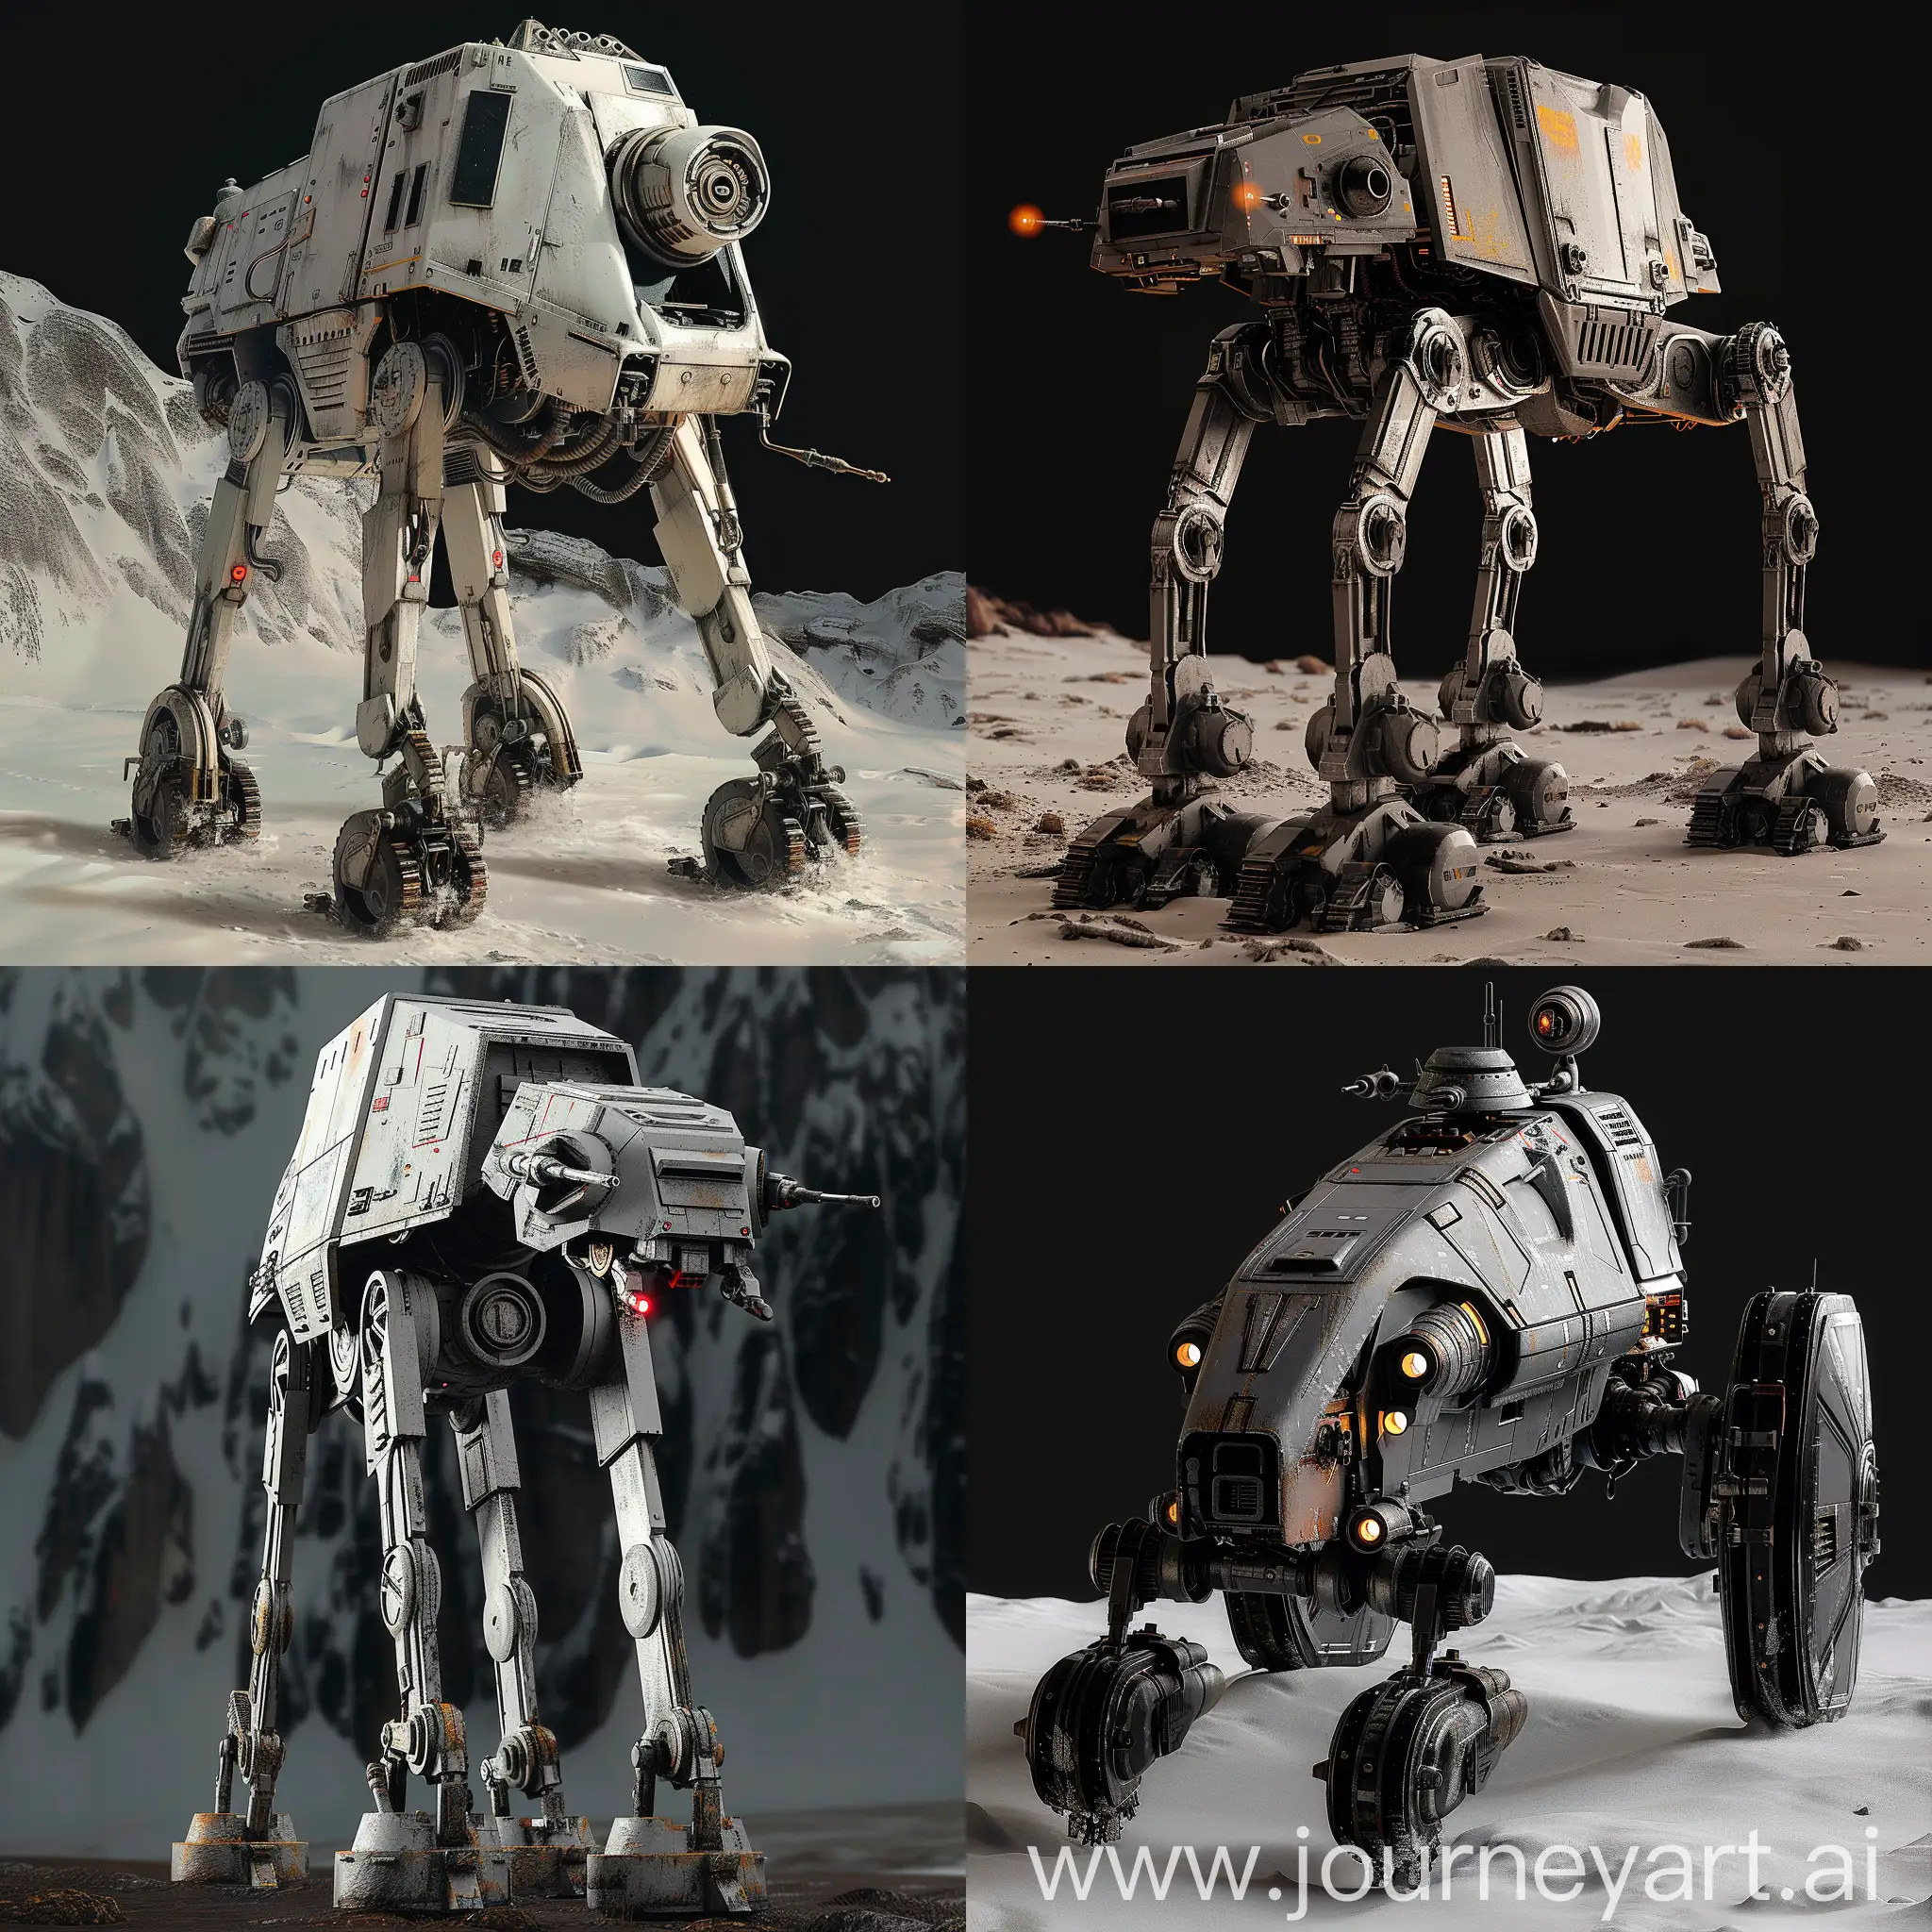 Futuristic Star Wars All Terrain Scout Transport https://static.wikia.nocookie.net/starwars/images/f/ff/ATST-SWBdice.png/revision/latest?cb=20230723050455, Advanced AI navigation system, Stealth mode, Energy shield technology, Advanced targeting system, Turbo thrusters, Adaptive camouflage, Drone deployment, Automated repair system, Personalized user interface, Integrated communication system, Nanomaterial armor, Nanite repair system, Nanosensors, Nanocommunication network, Nanodrones, Nanoweaponry, Self-repairing nanobots, Nanocloaking device, Nanomedicine dispenser, Nanopower source, Biometric security system, Genetic modification for enhanced performance, Bio-armor regeneration, Biofuel system, Bio-weaponry, Bio-sensors, Biomechanical systems, Bio-adaptive camouflage, Bioluminescent displays, Bio-inspired design, octane render --stylize 1000